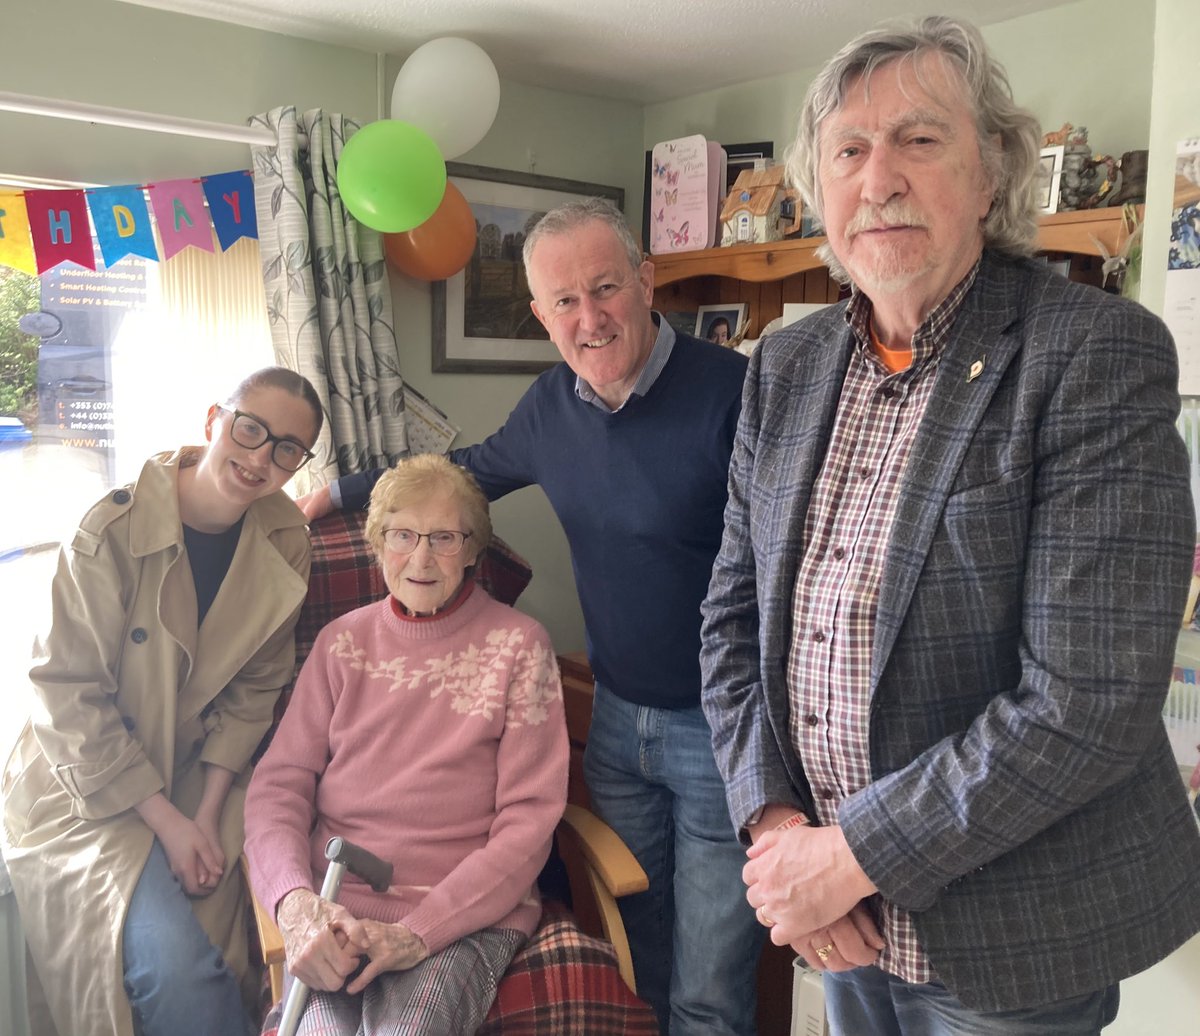 Lá breithe sona Maisie Moley “May God bless you Maisie on this milestone 100th birthday & continue to bless you with good health, happiness, and many more years of life. We thank you & the family for your warm welcome & great friendship throughout the years” @conormurphysf